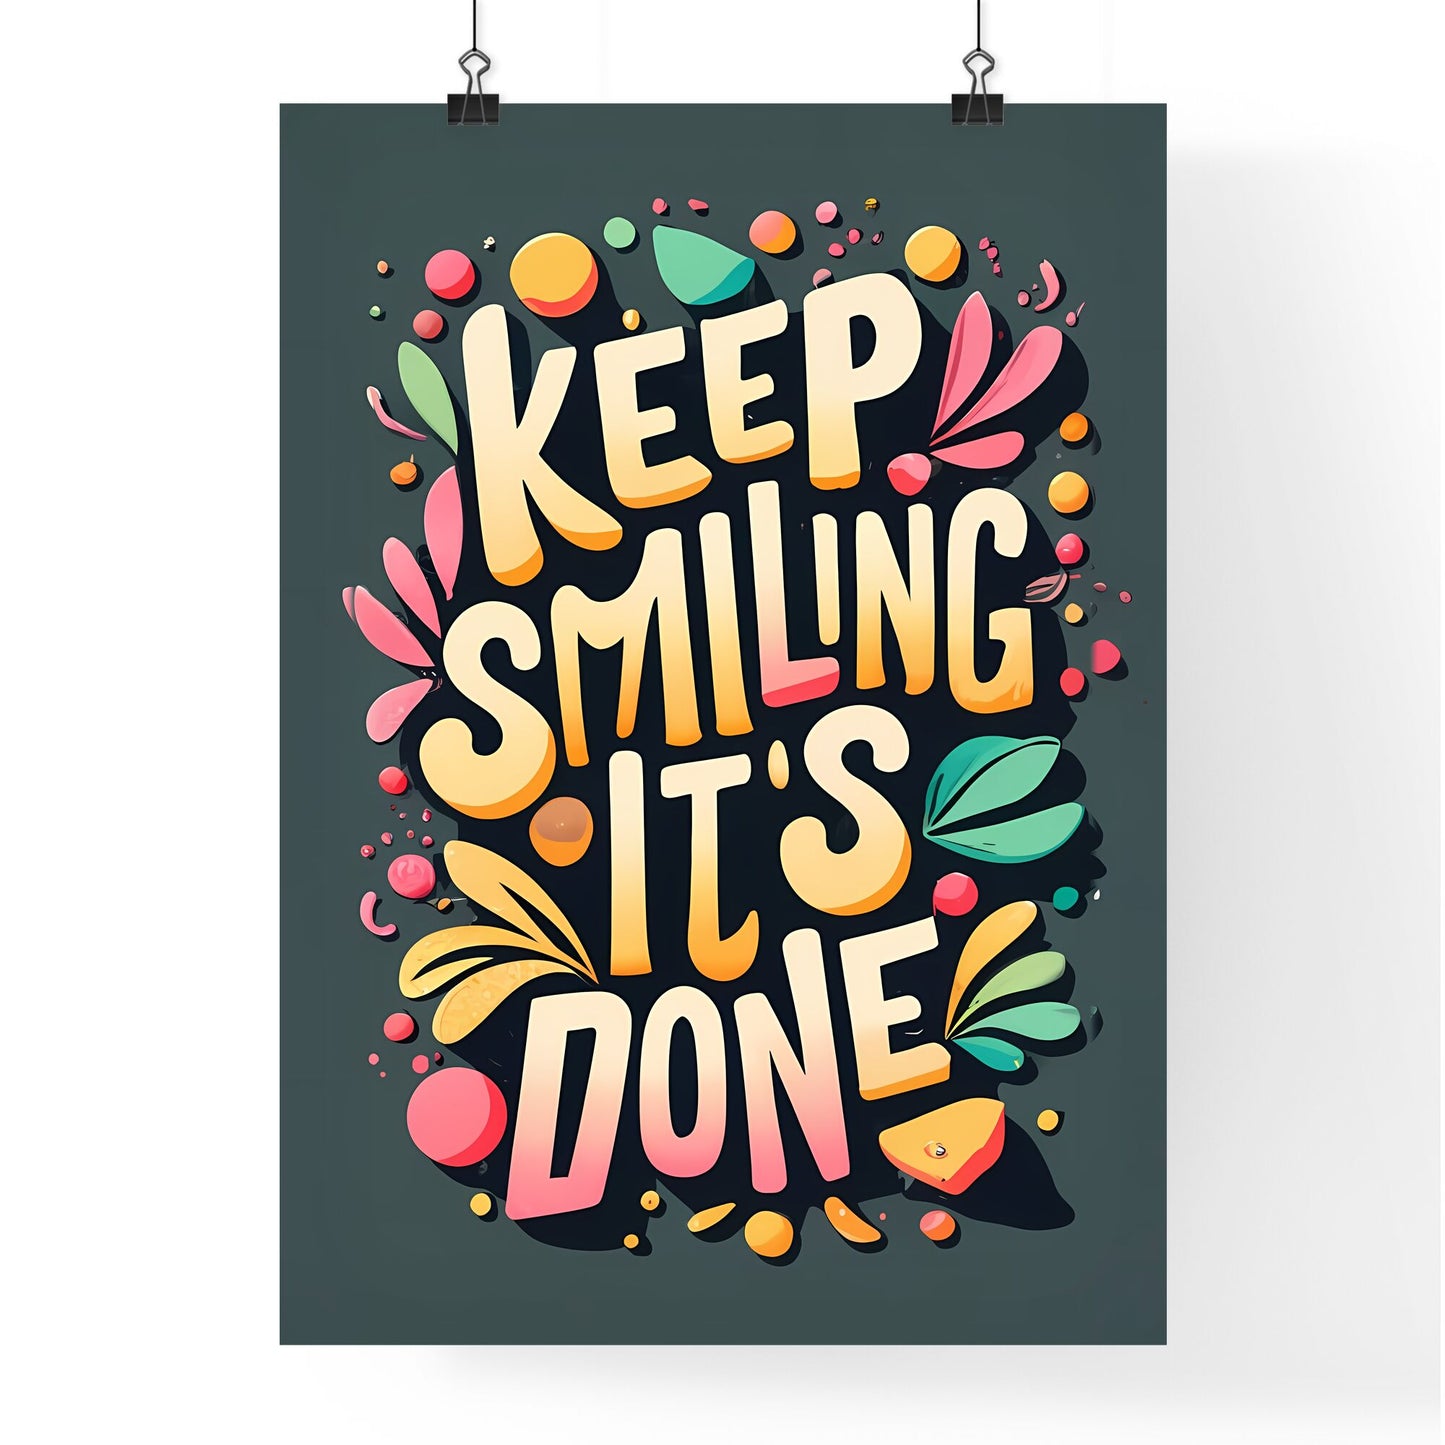 Keep Smiling, Its Done - A Colorful Text On A Black Background Art Print Default Title